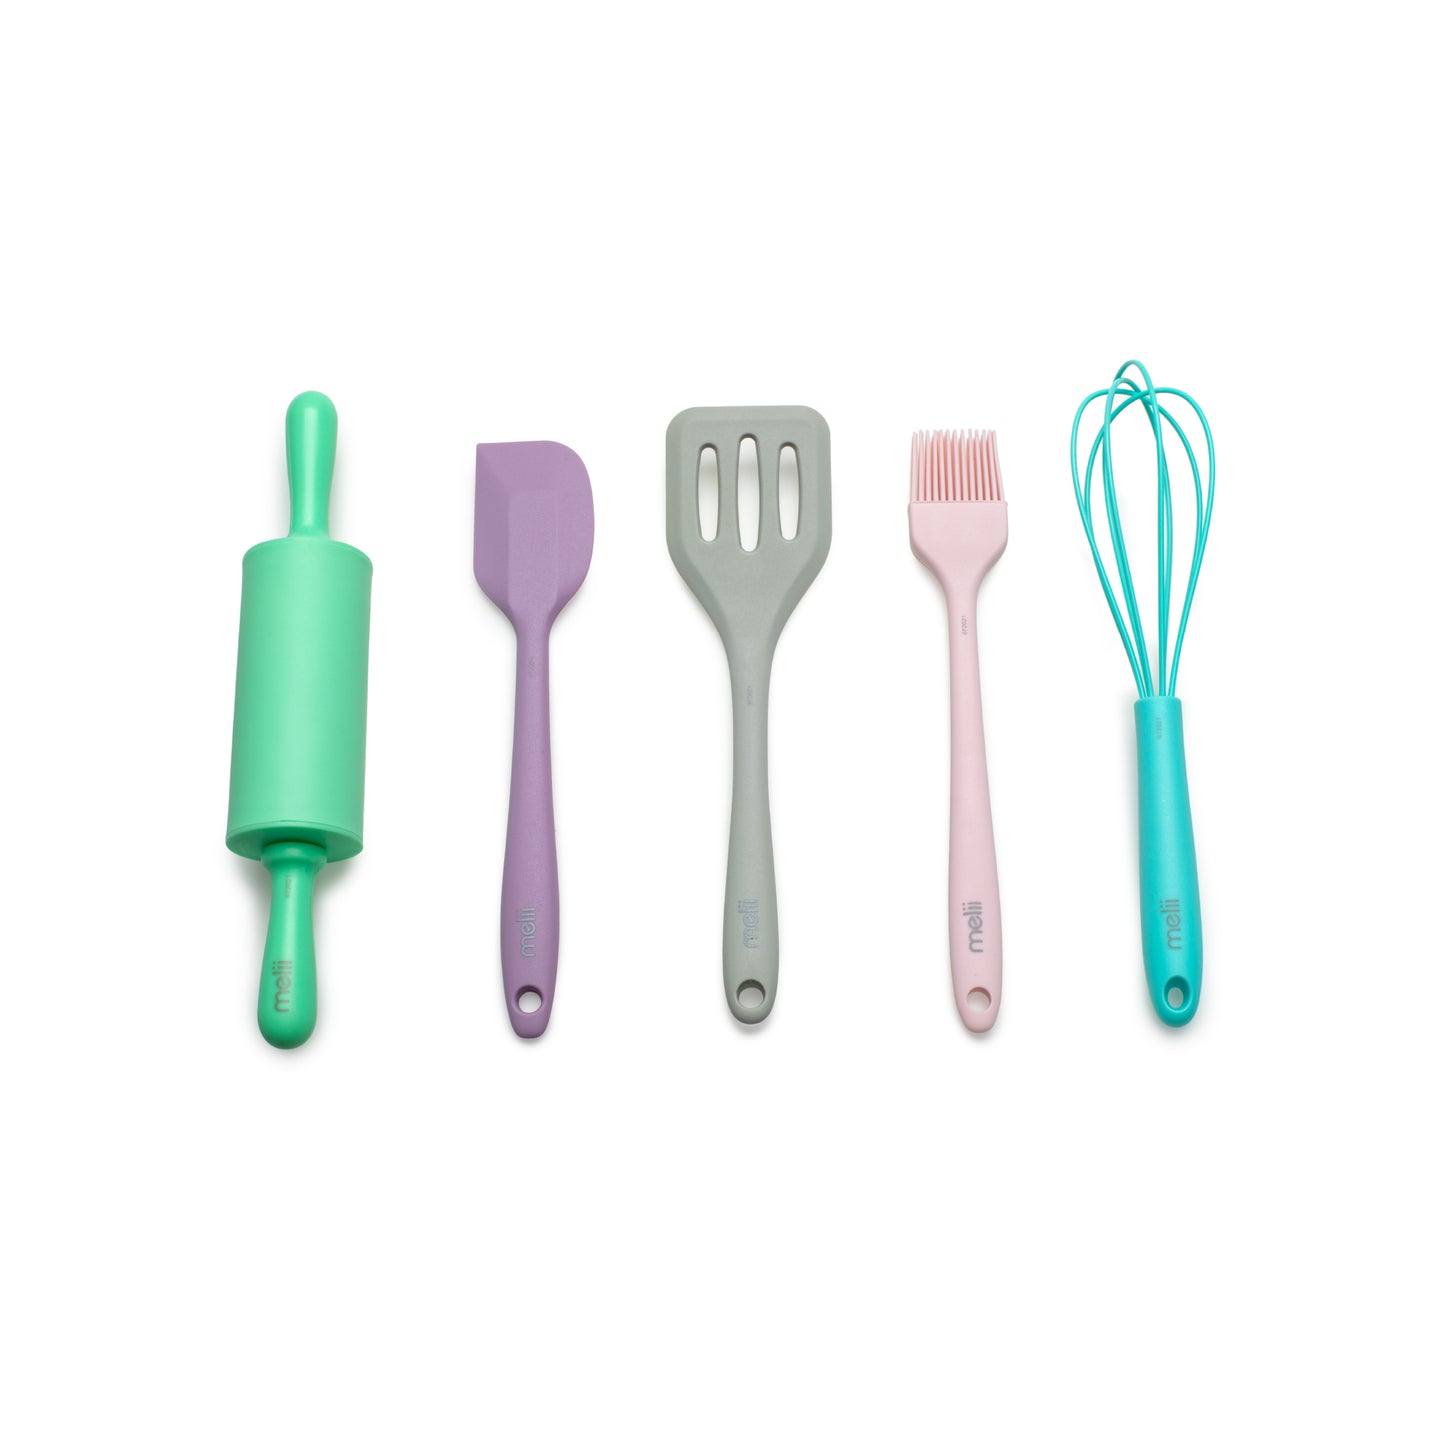 Melii Kids 5 Piece Mini Baking Tool Set - Safe, Durable, Versatile Culinary Fun for Young Chefs - BPA Free, Easy to Clean, Ideal for Play, Real Cooking, Great Gift Idea